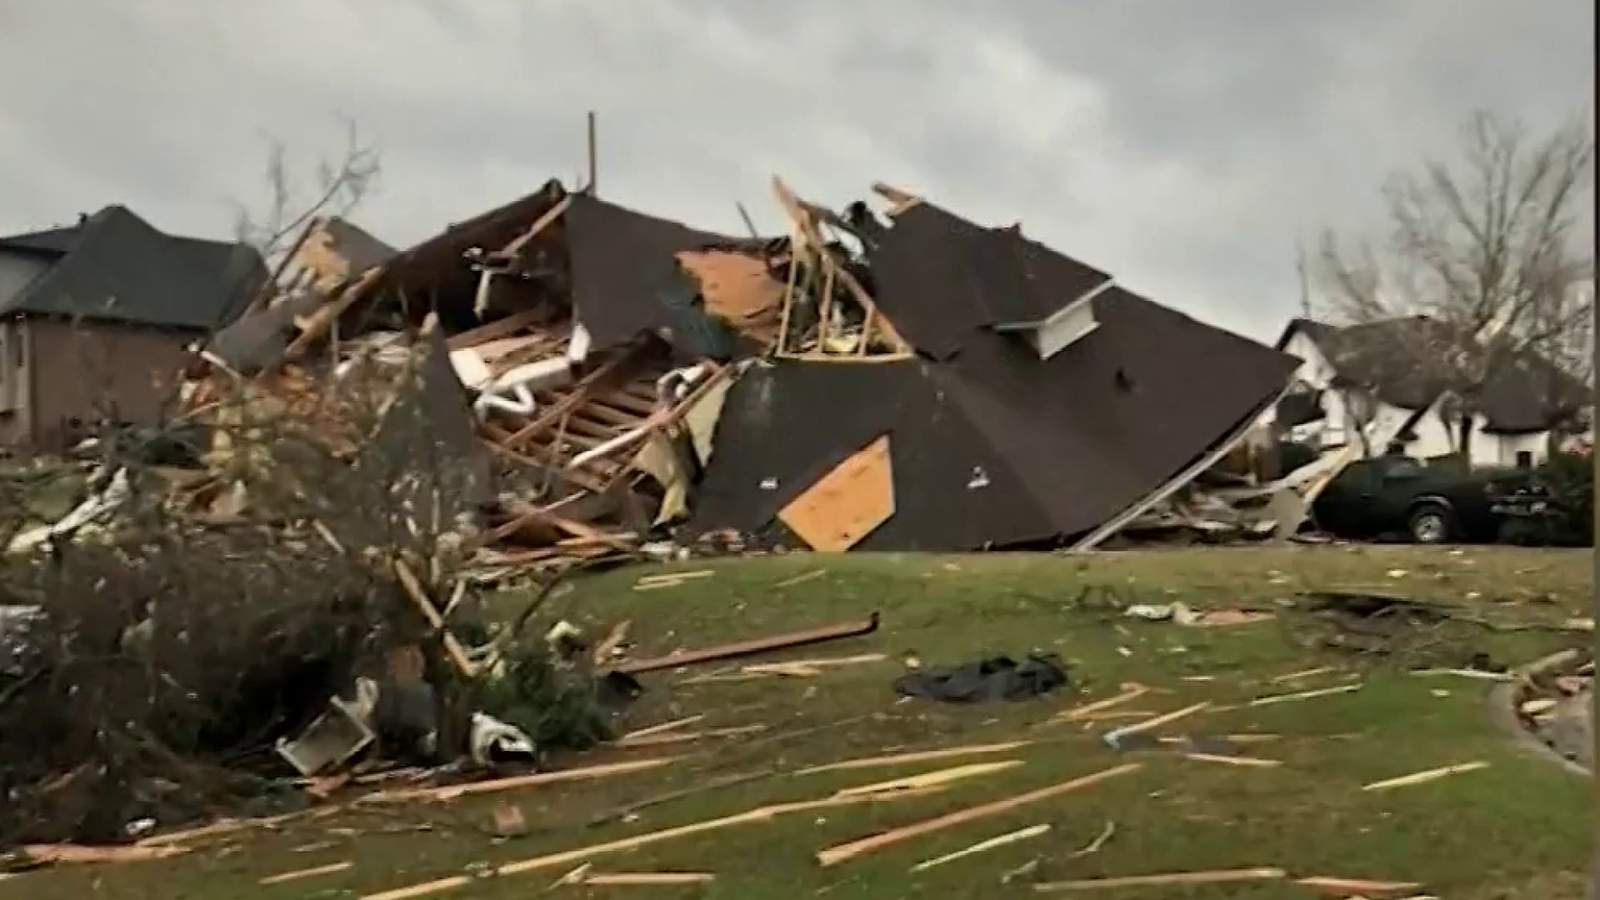 Alabama, Georgia pick up the pieces after deadly tornadoes